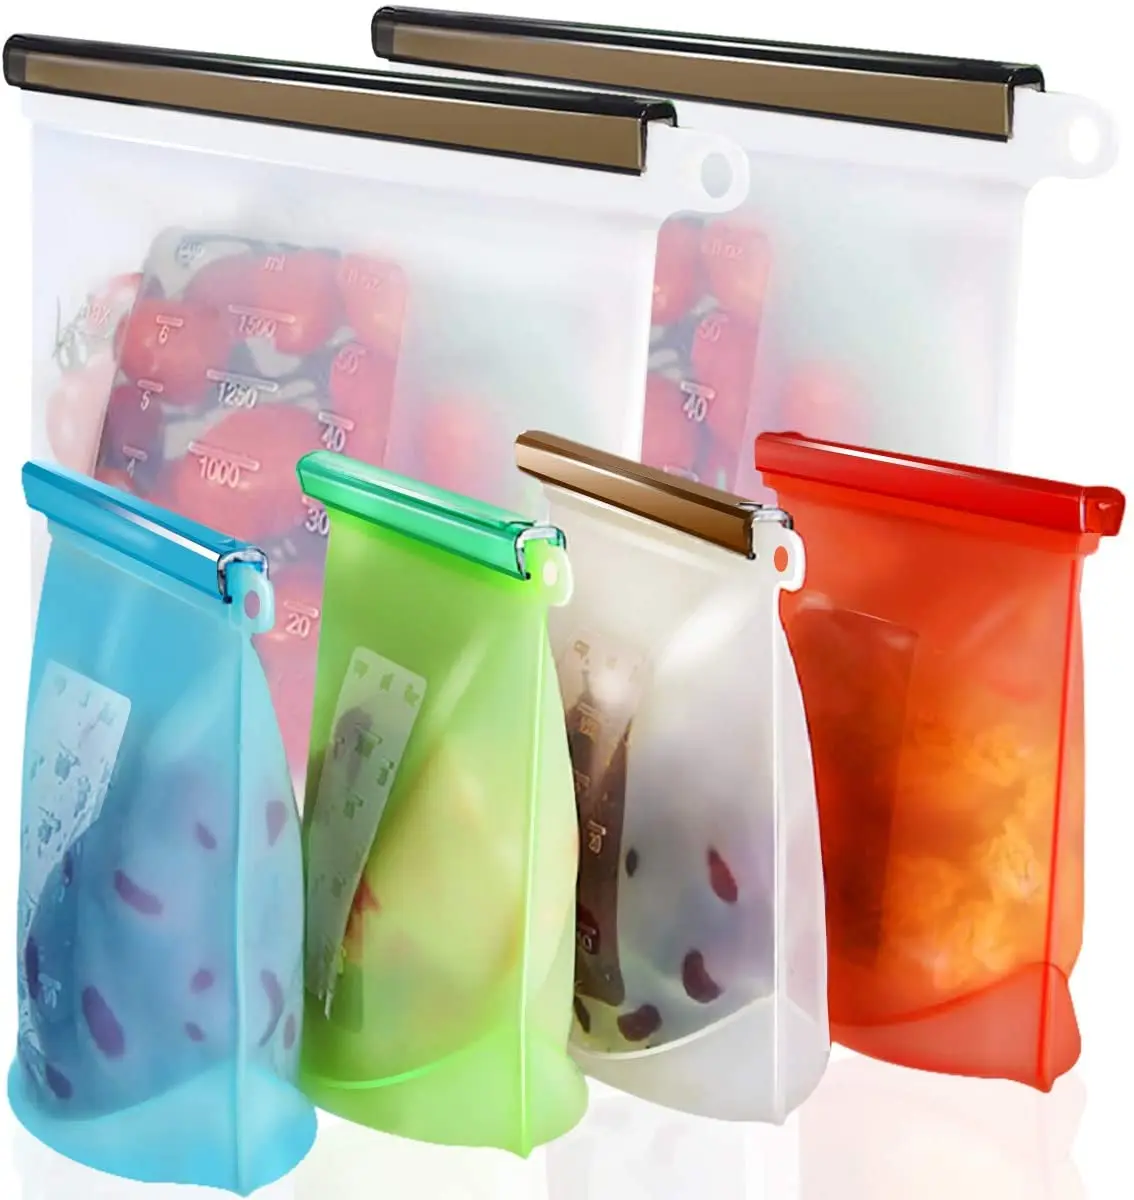 

Resealable Bpa Free Custom Fridge Preservation Fresh-Keeping Food Snack Bags Silicone Food Storage Bag With Zipper, Blue, red, green and white